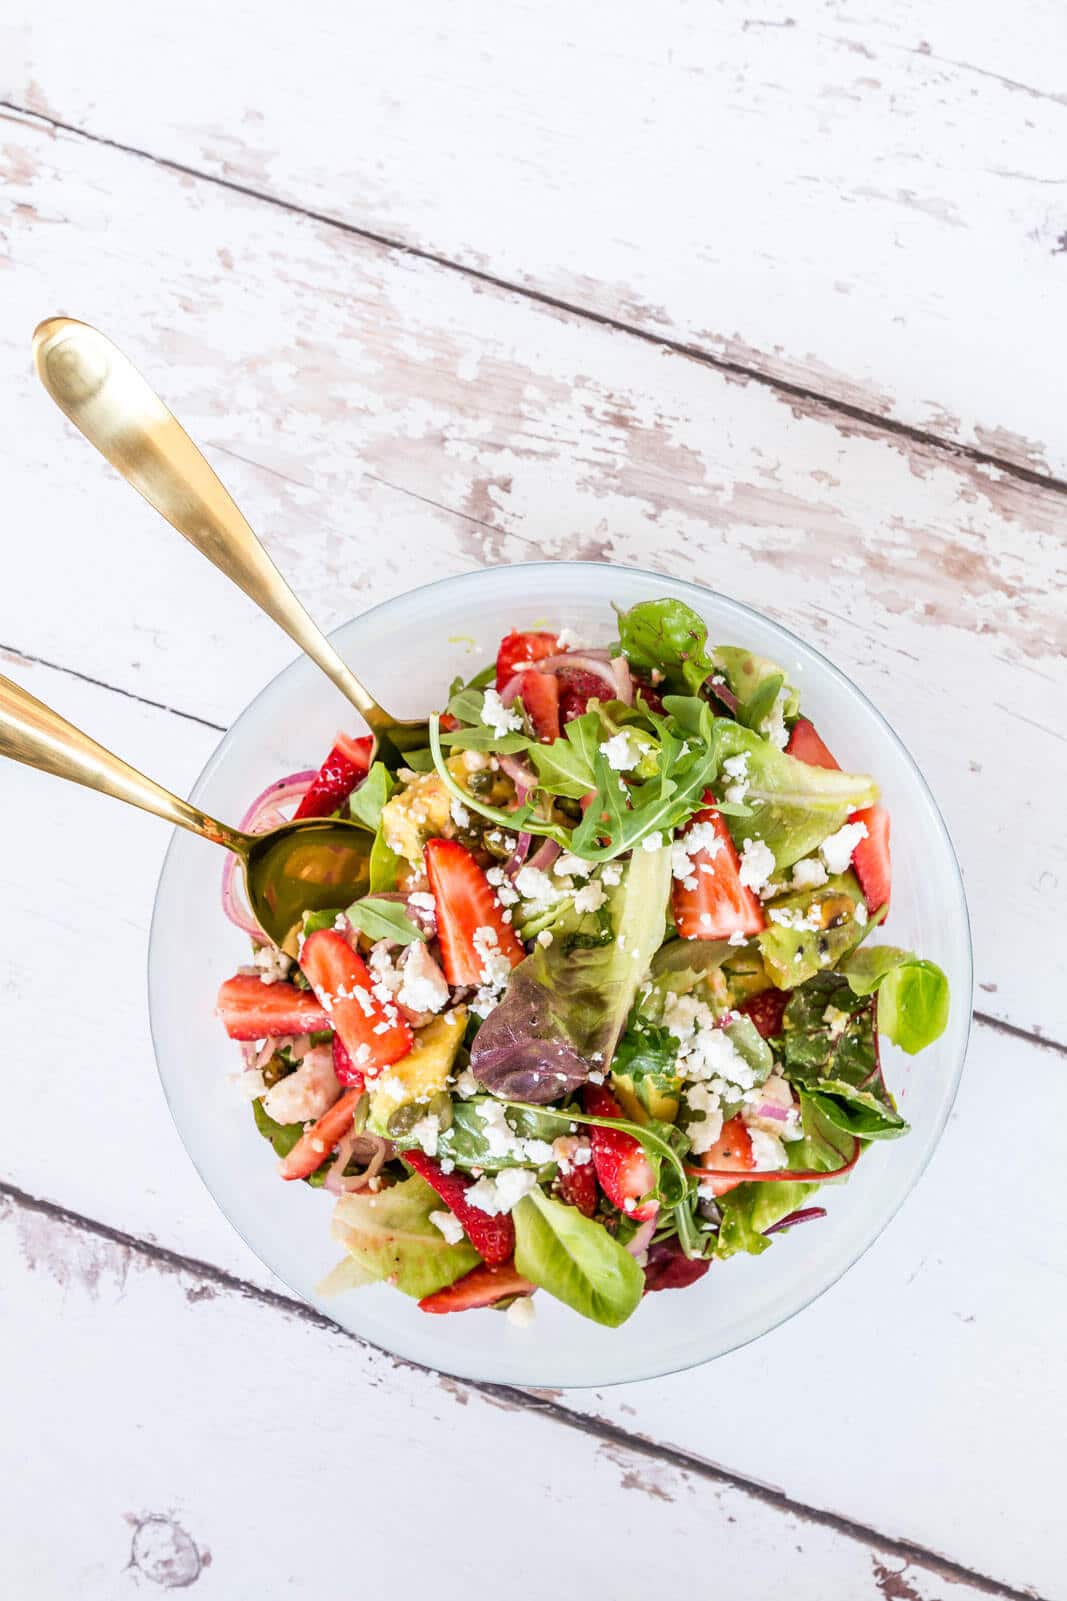 Looking for a gorgeous and healthy salad for Spring? This spring salad with green leaves, strawberries and avocado is the ideal recipe to try right now! great healthy sauce and fresh ingredients that’s ideal for any occasion!